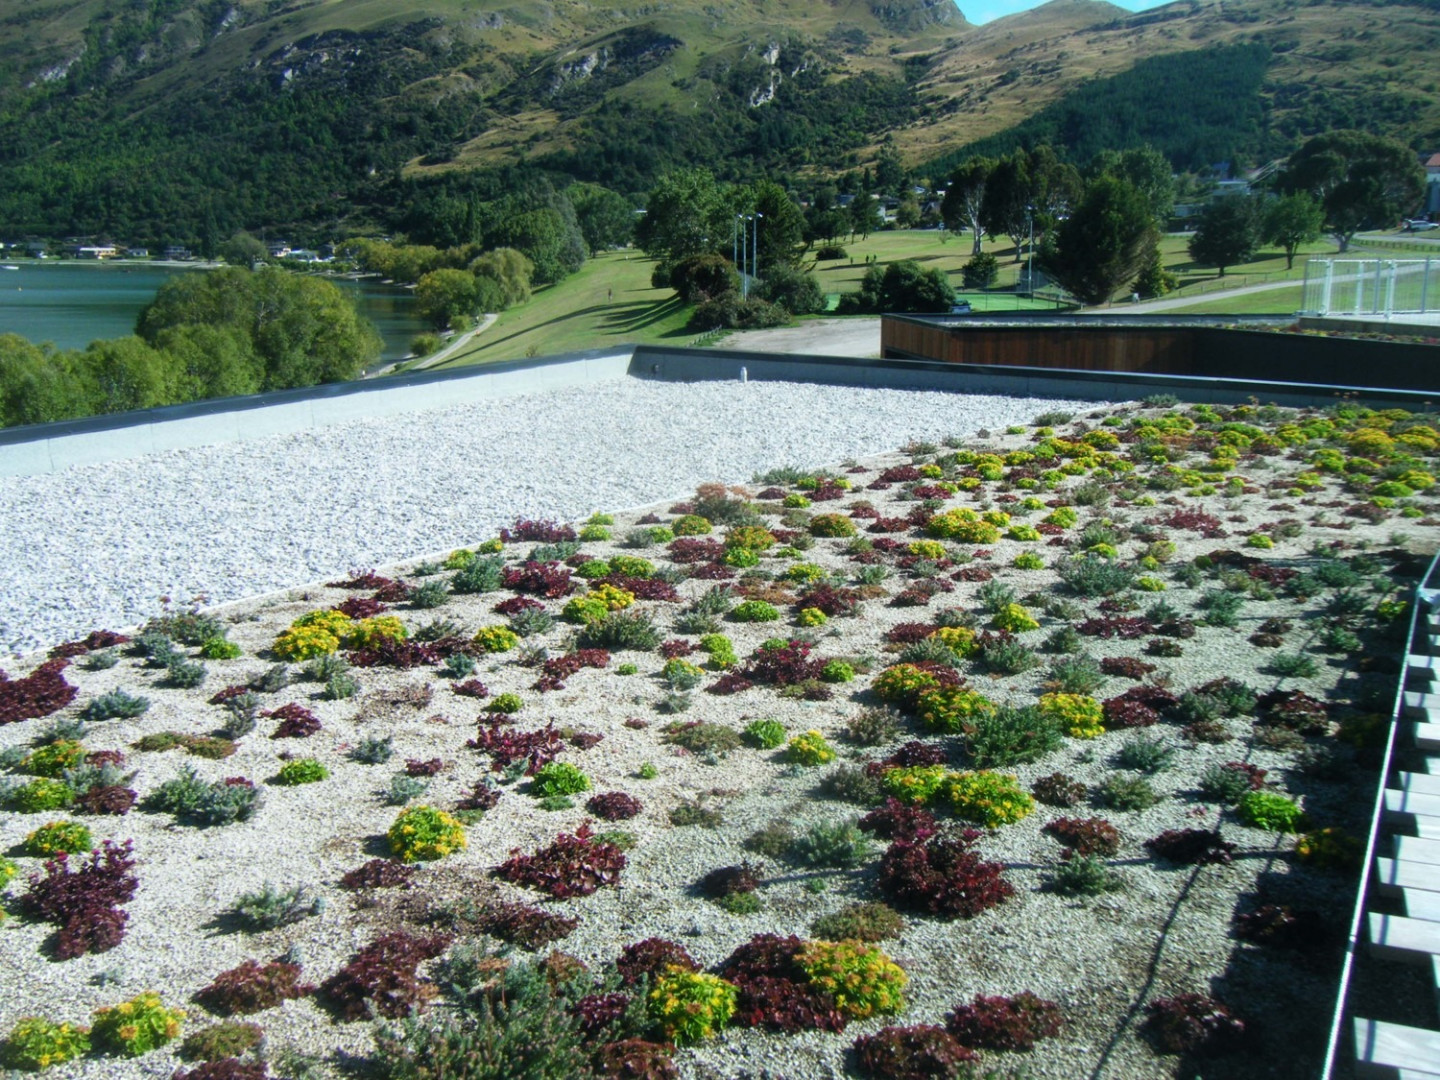 EQUUS SOPREMA DUOTHERM GREEN ROOF SYSTEM from Equus Industries